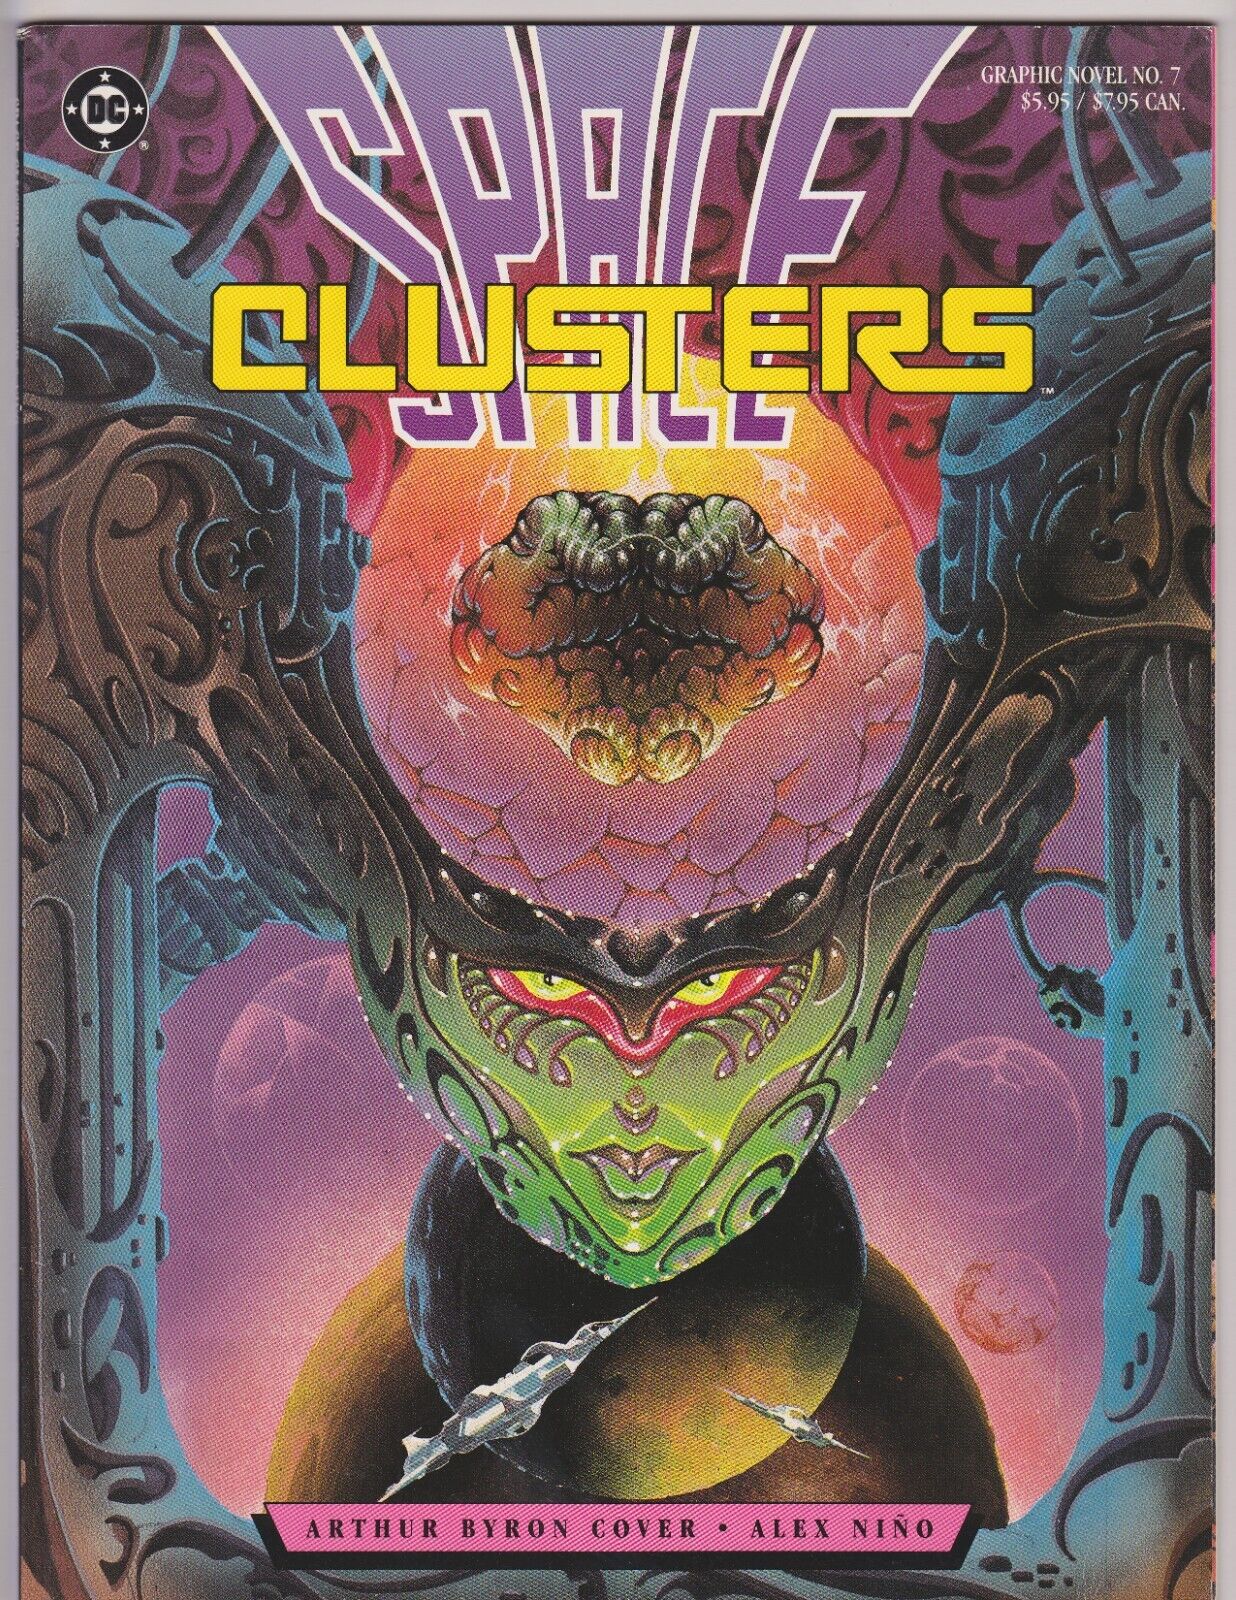 GN SPACE CLUSTERS DC GRAPHIC NOVEL 1986 ALEX NINO ART ARTHUR BYRON COVER STORY